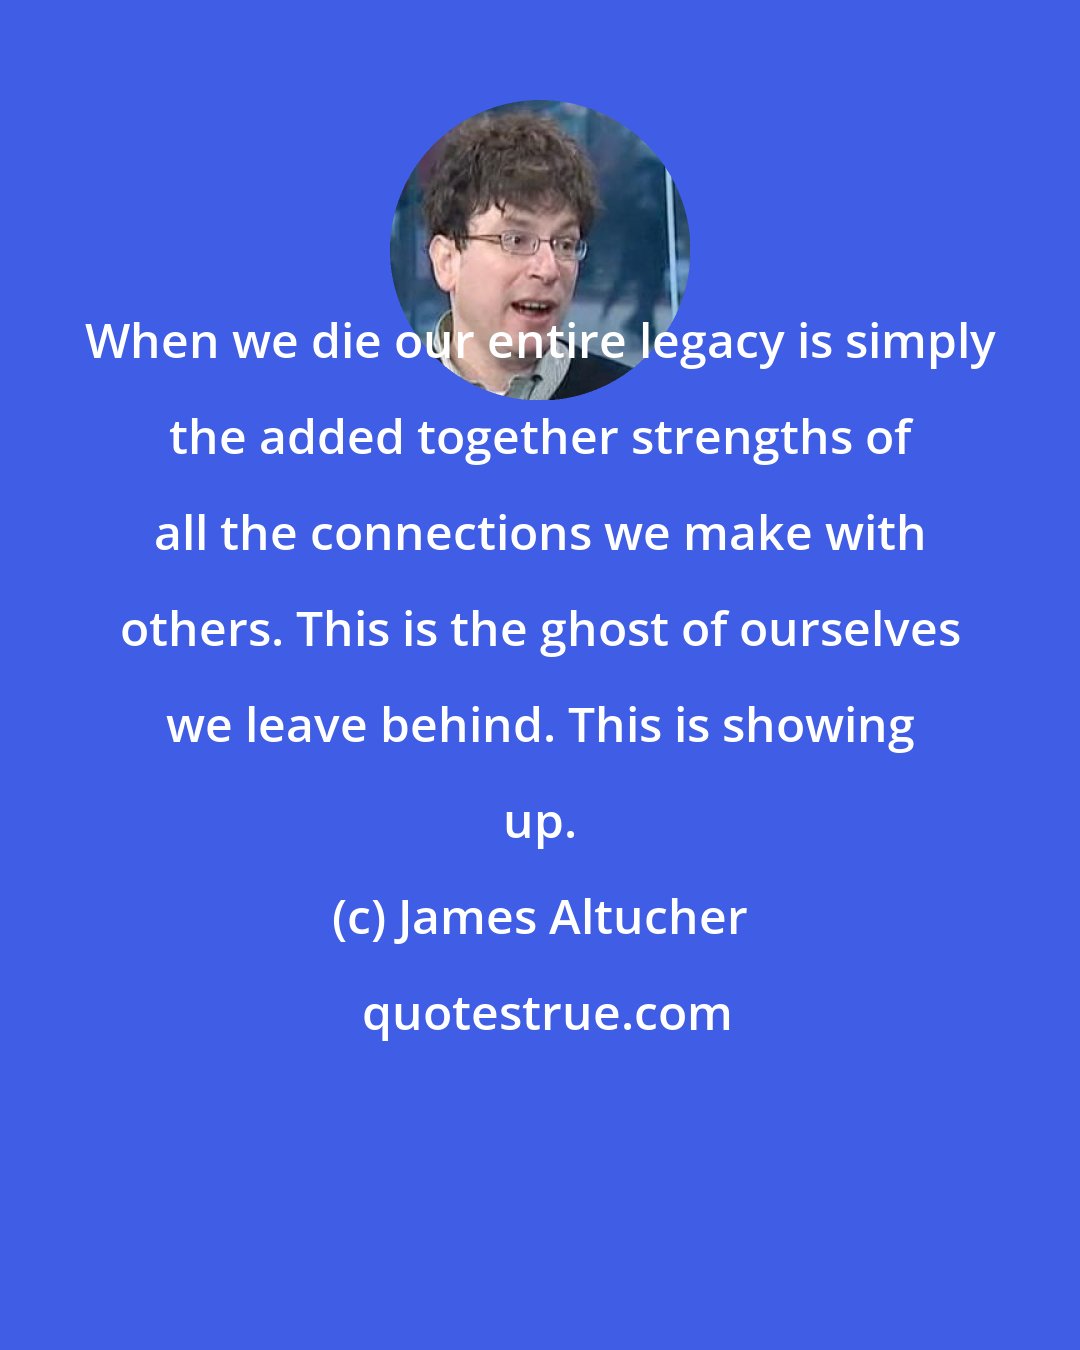 James Altucher: When we die our entire legacy is simply the added together strengths of all the connections we make with others. This is the ghost of ourselves we leave behind. This is showing up.